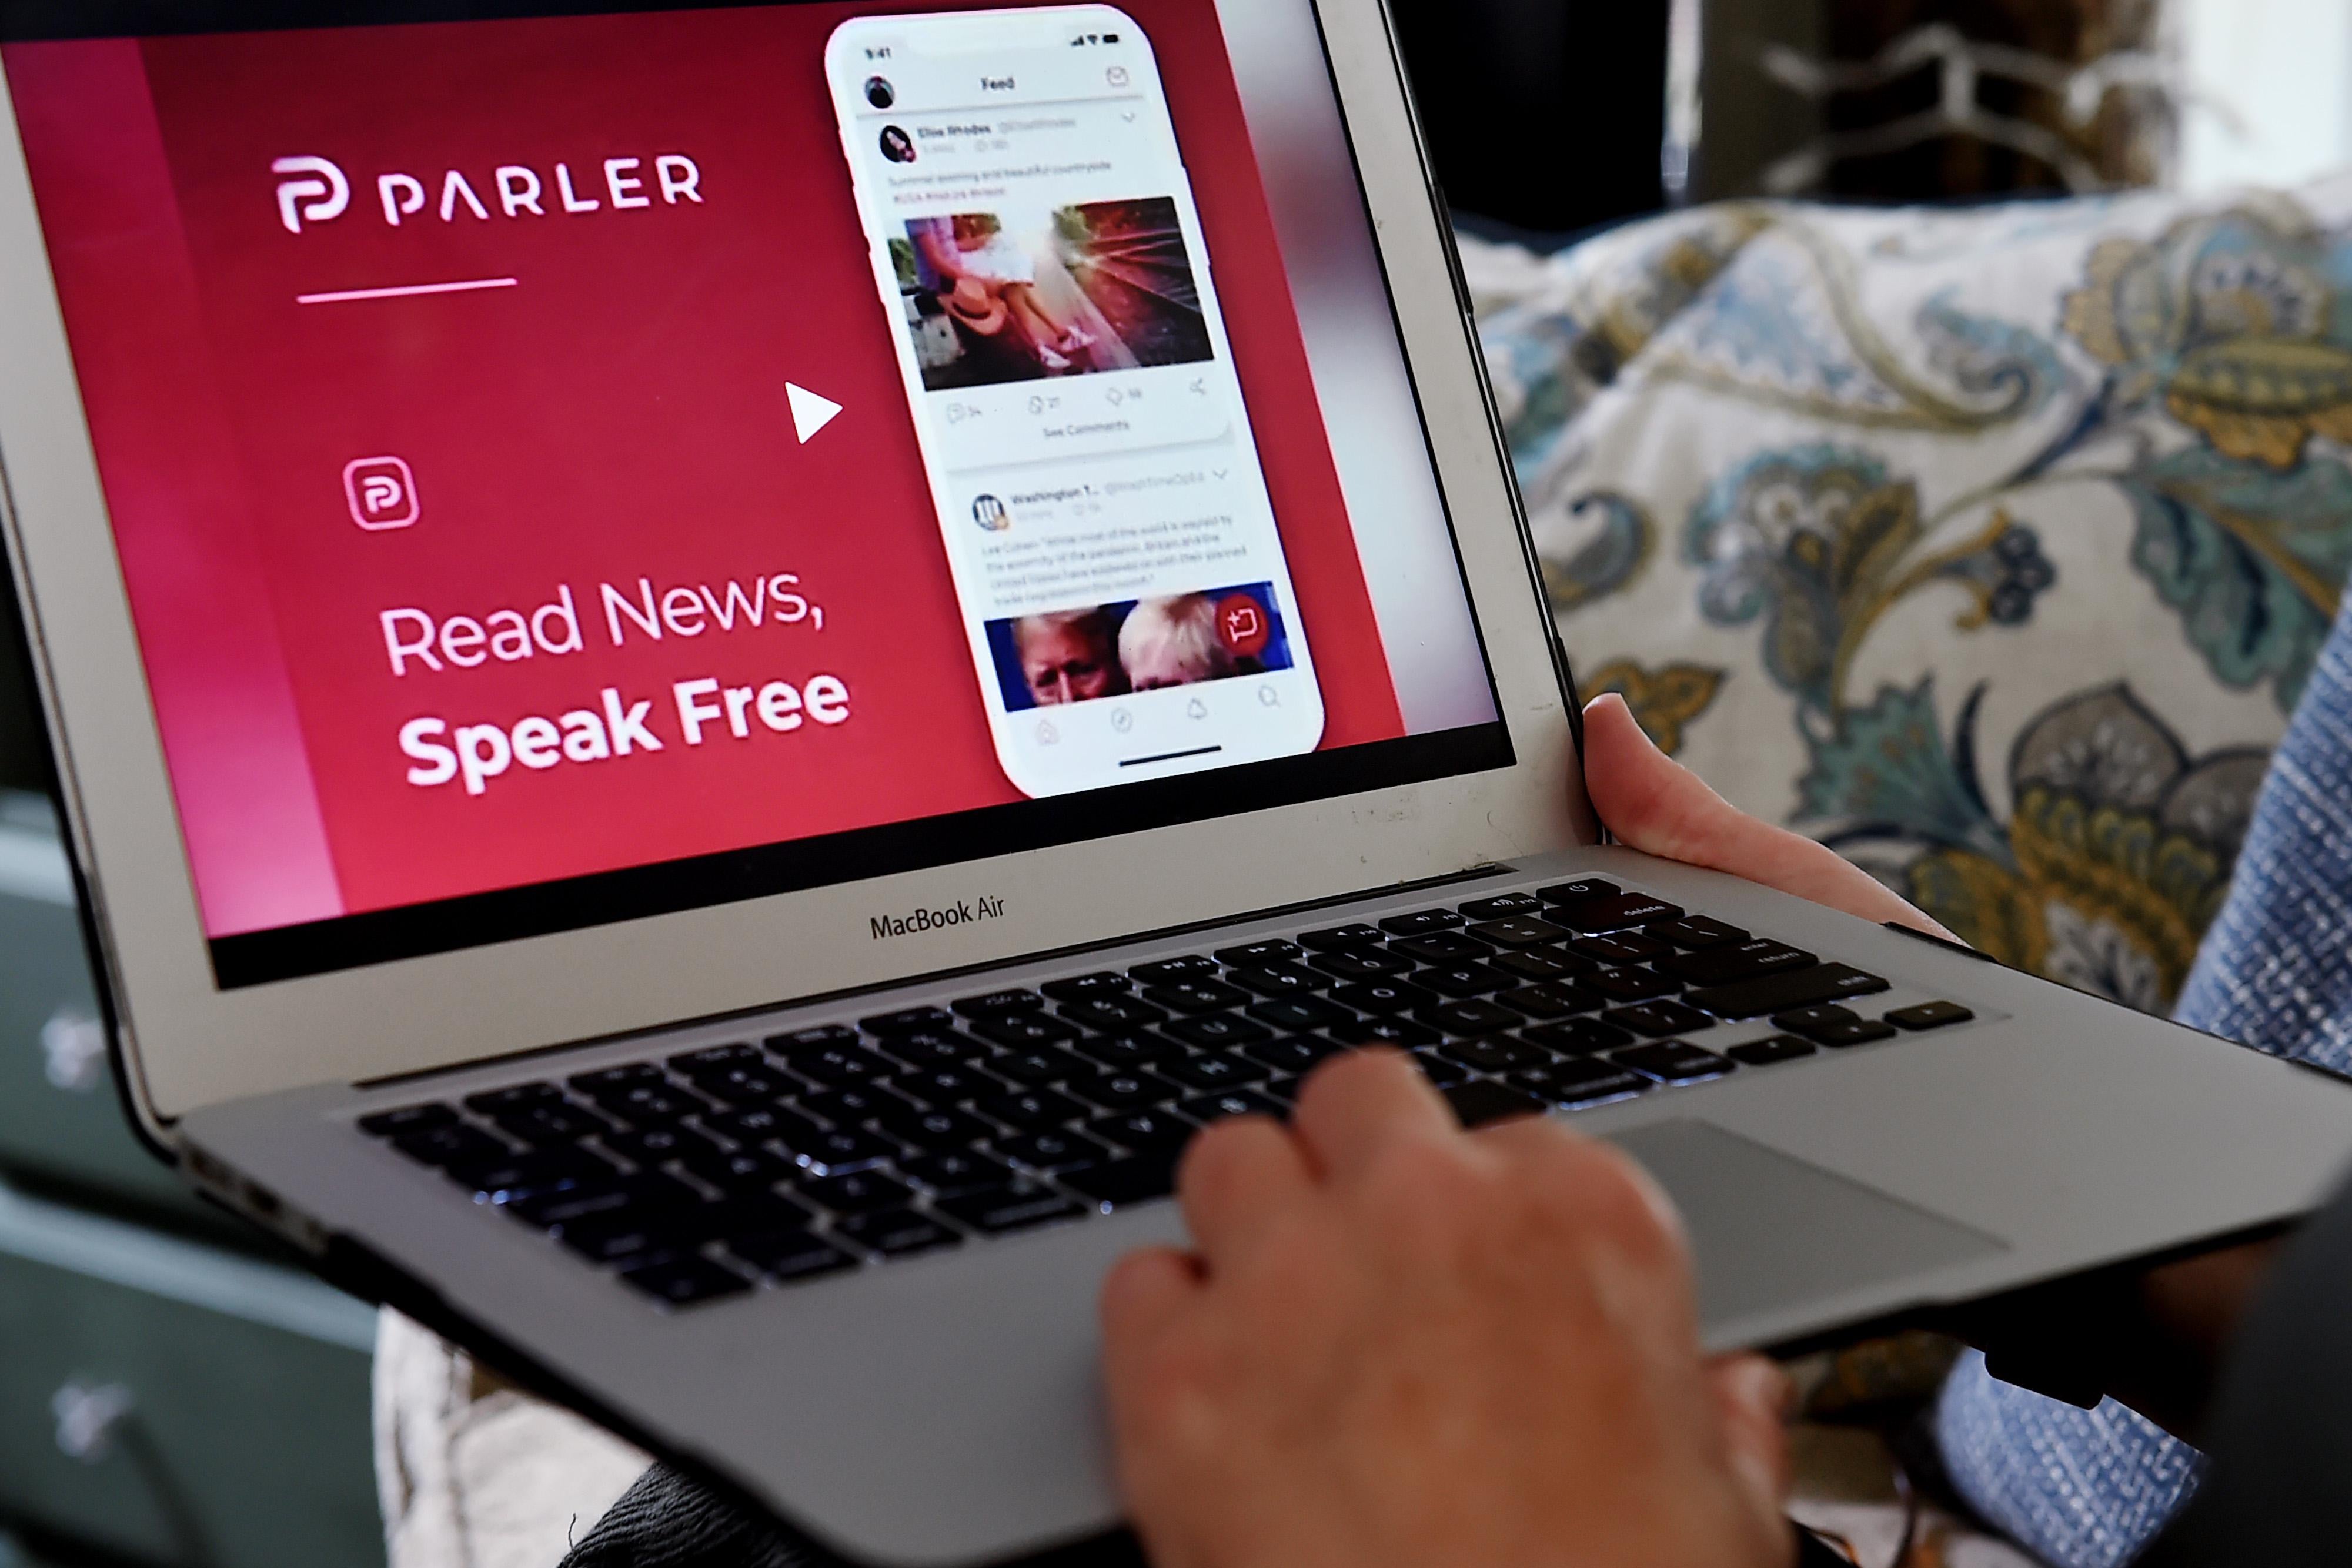 Hands hold a laptop that shows the homepage of Parler, which says, "Real News, Speak Free."